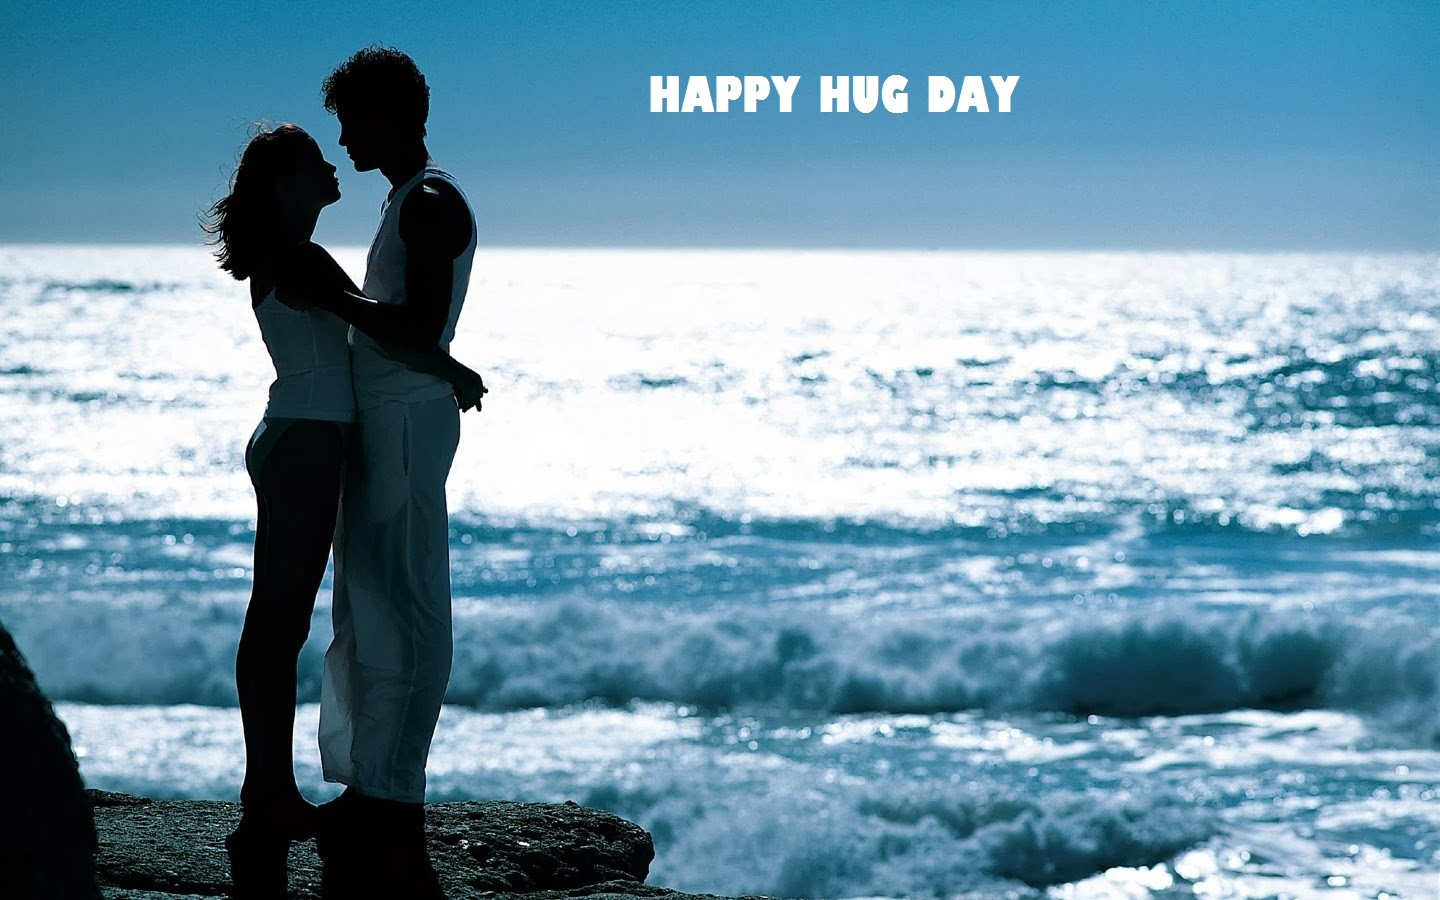 happy hug day images for friends